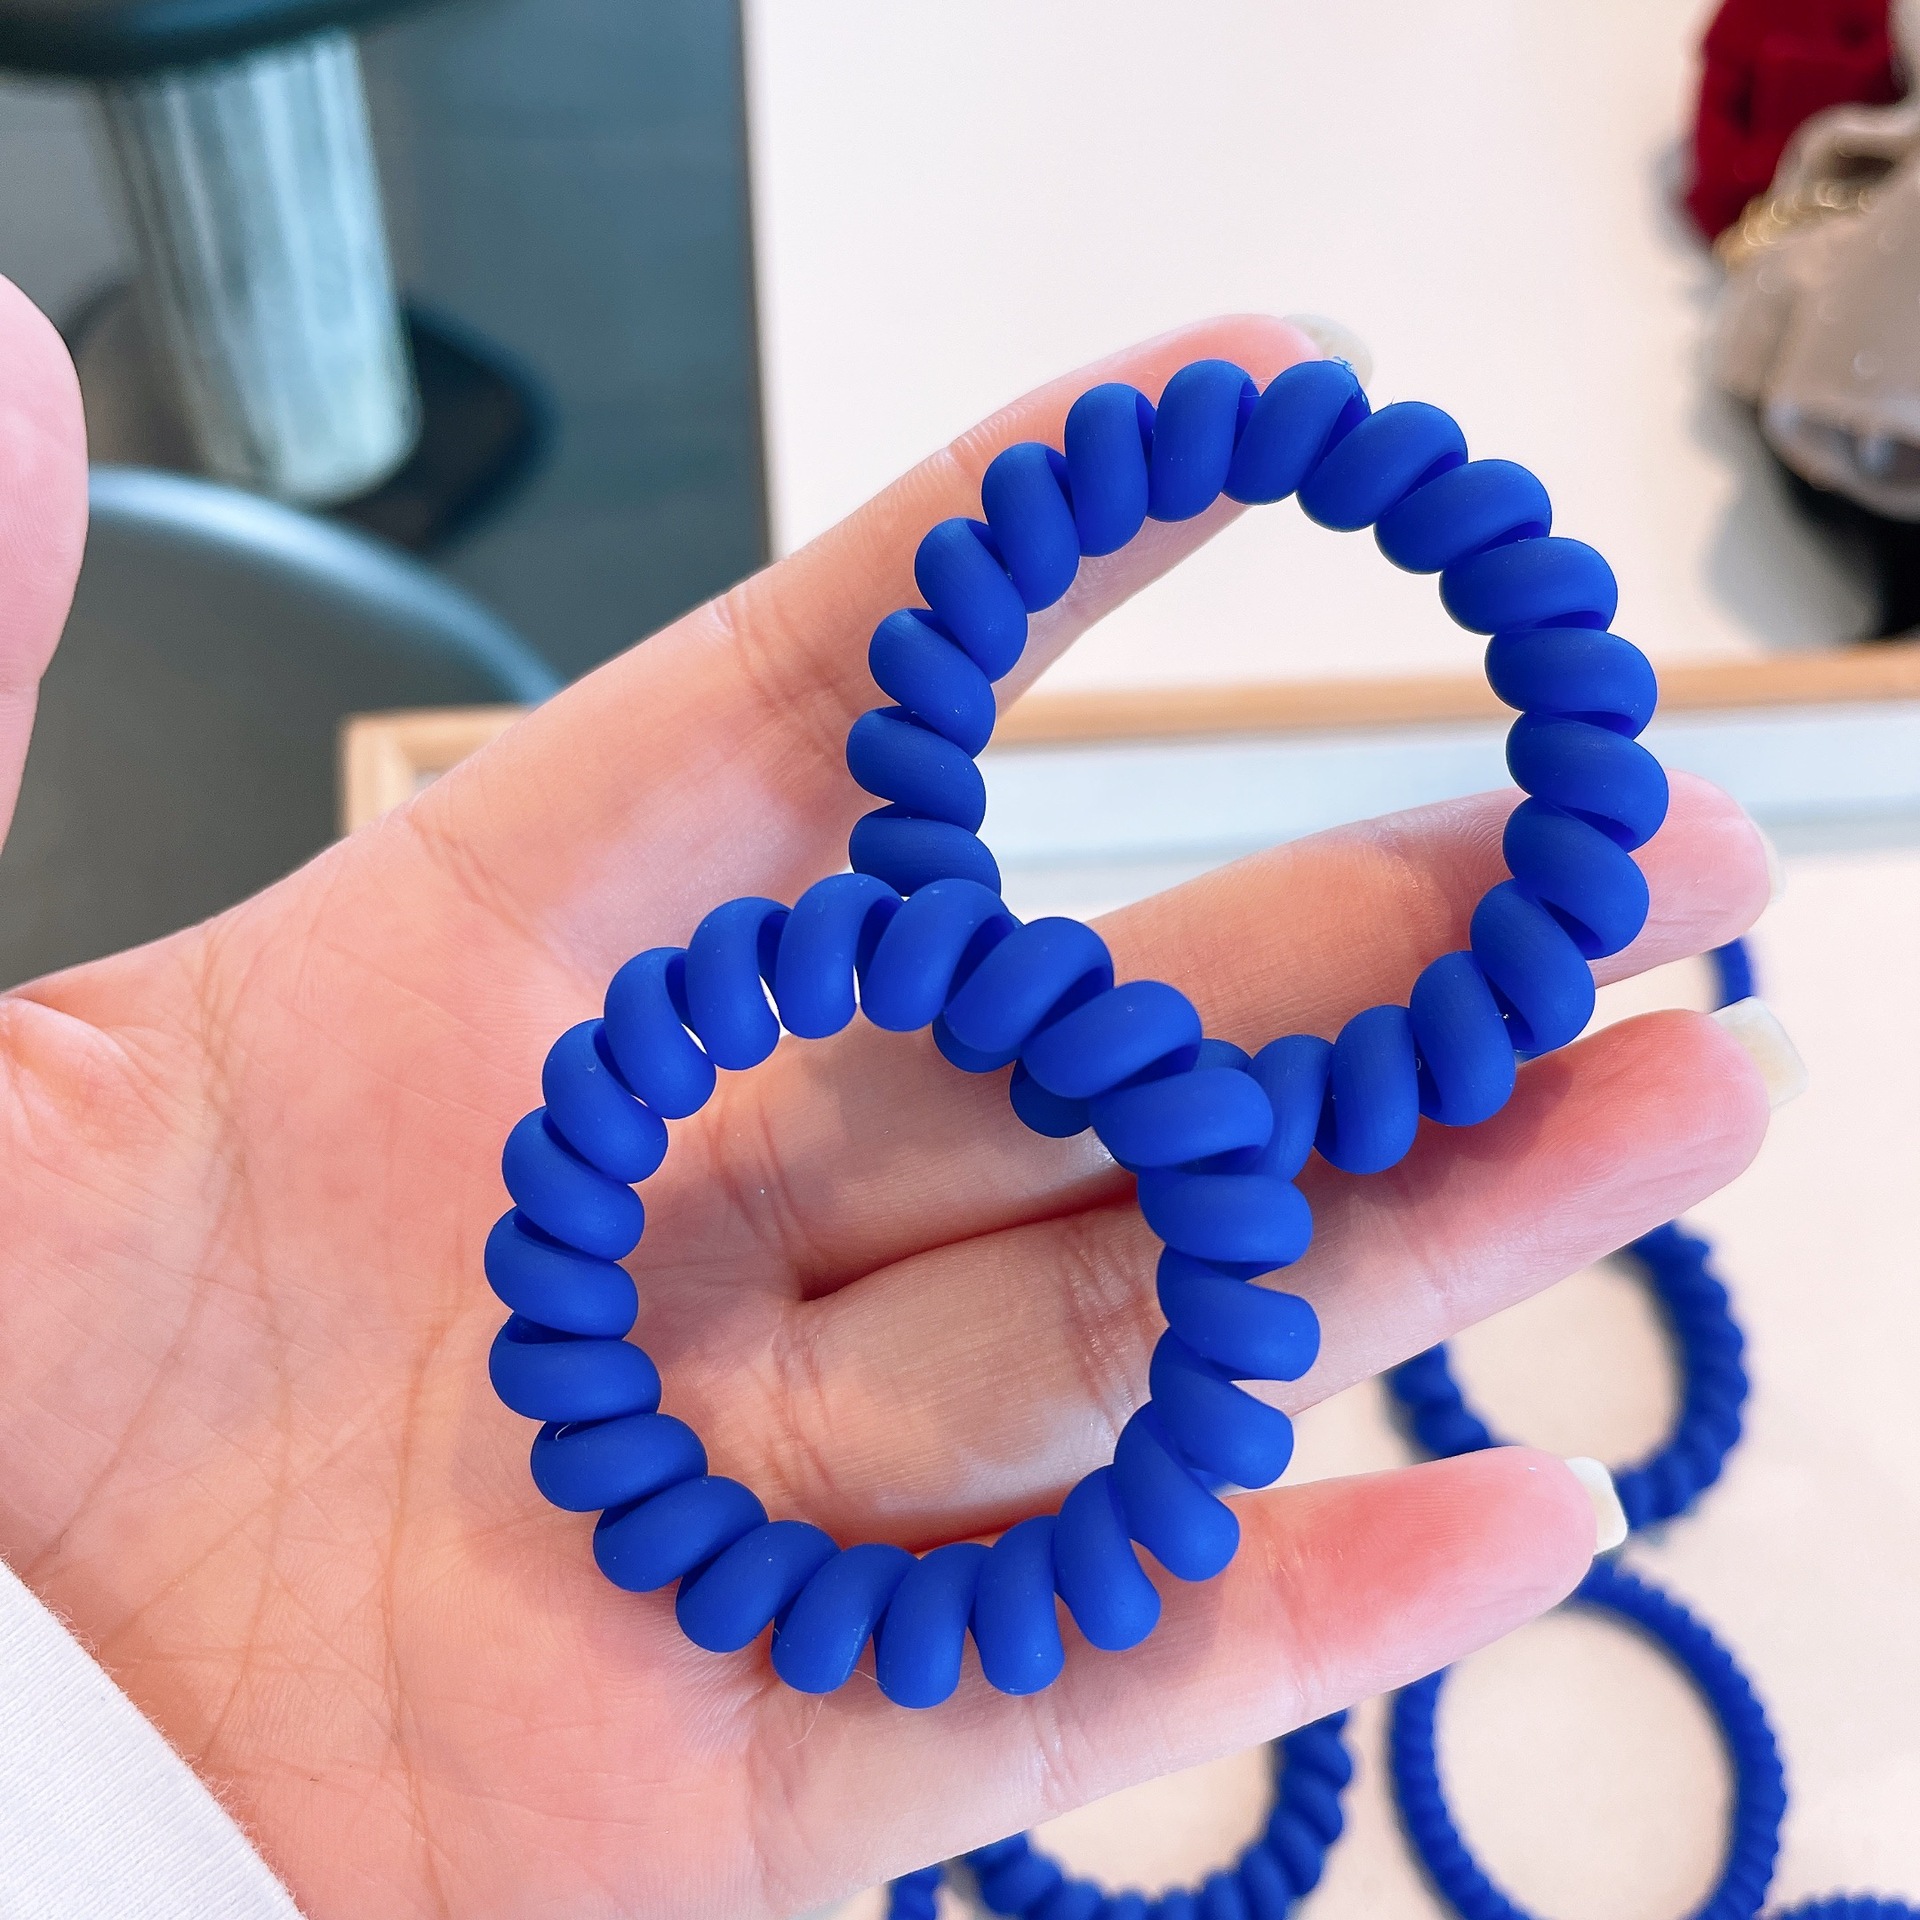 Korean Klein blue highelastic telephone wire hair ring frosted seamless head ropepicture4